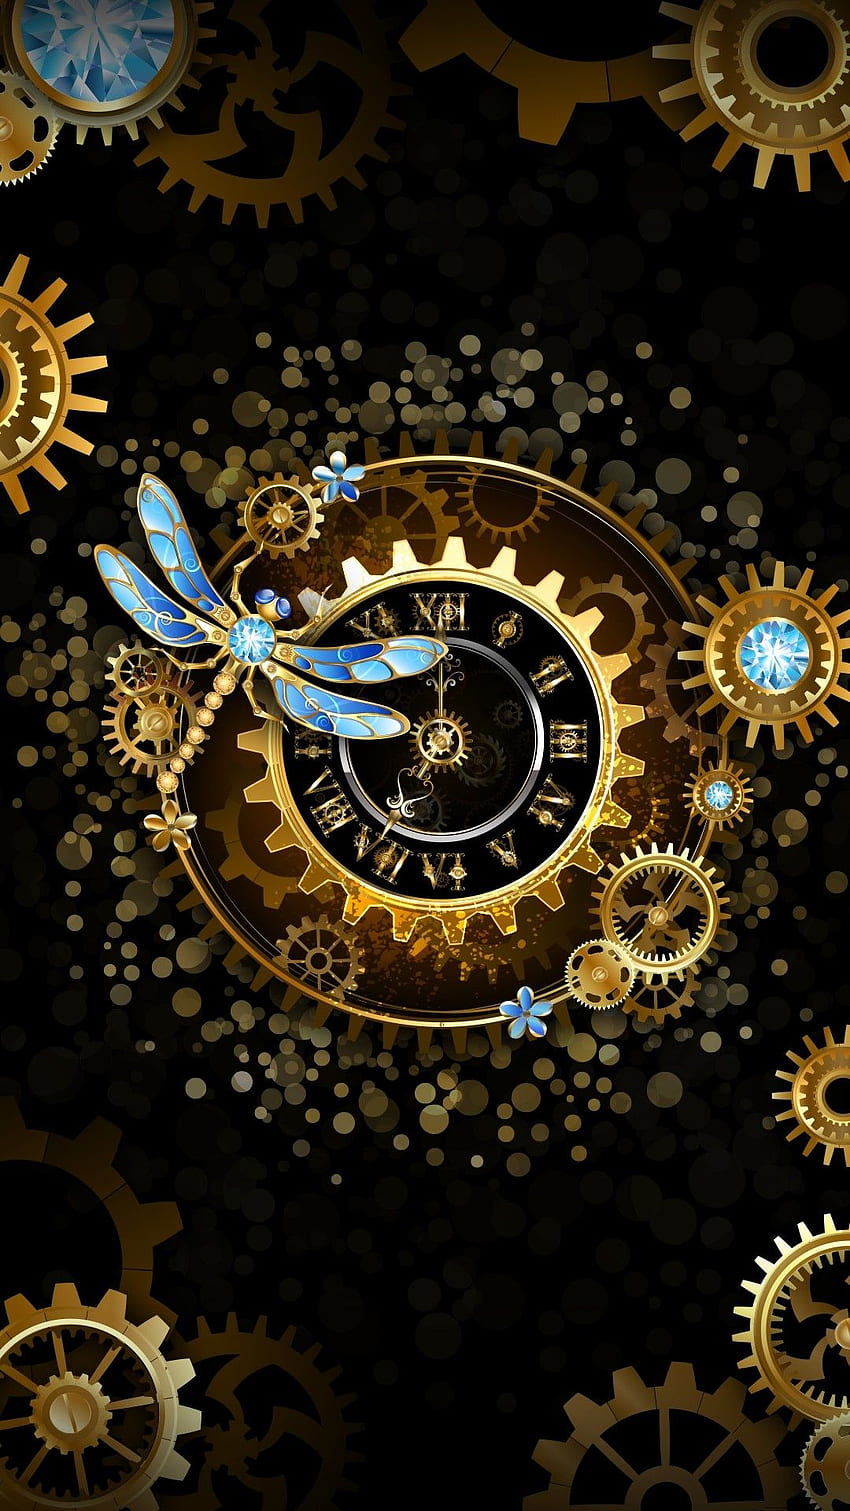 Clock Tower 3D Live Wallpaper: Reviews, Features, Pricing & Download |  AlternativeTo